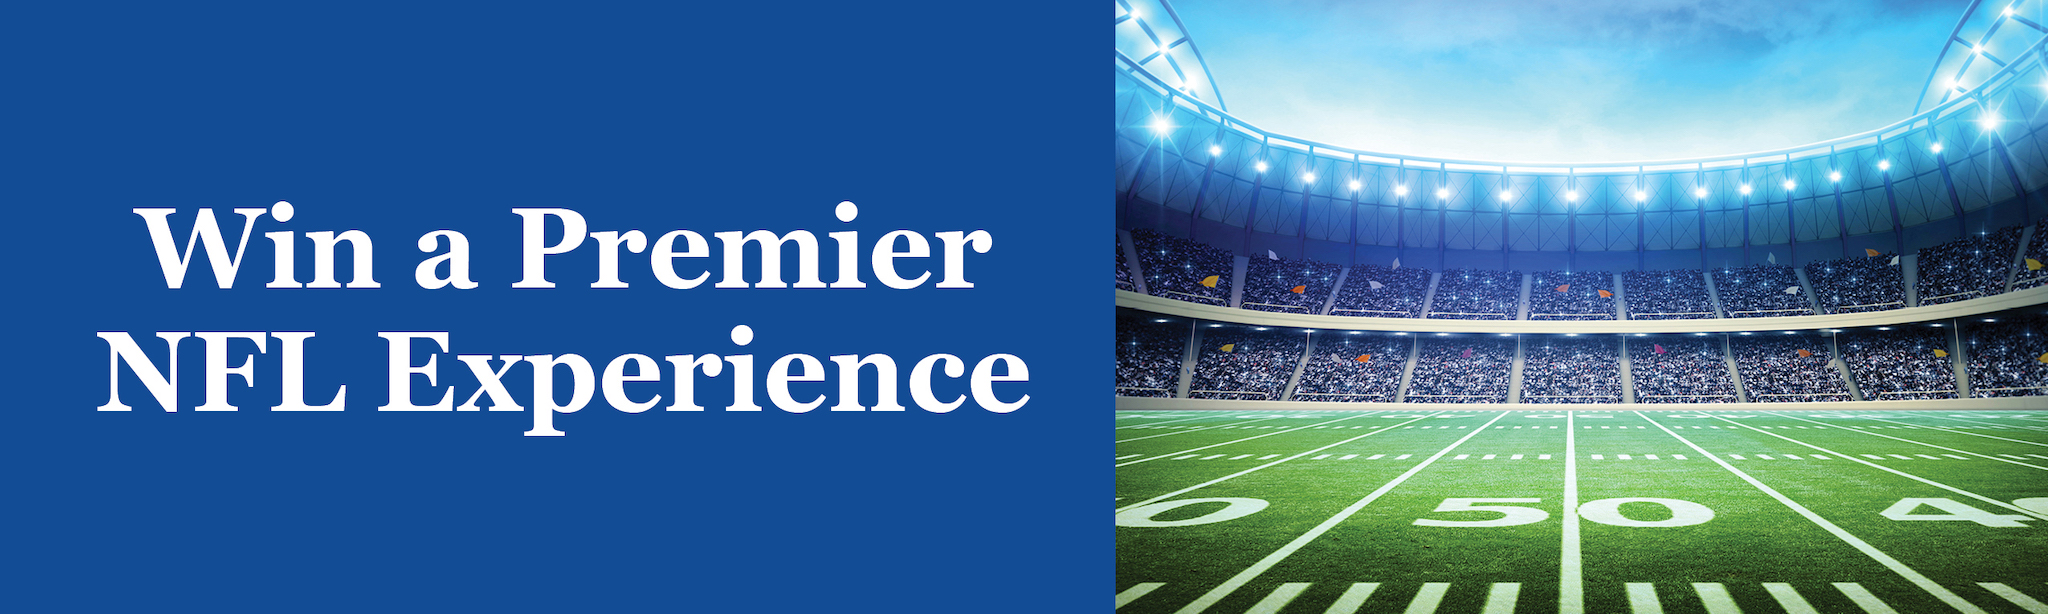 Win a Premier NFL Experience